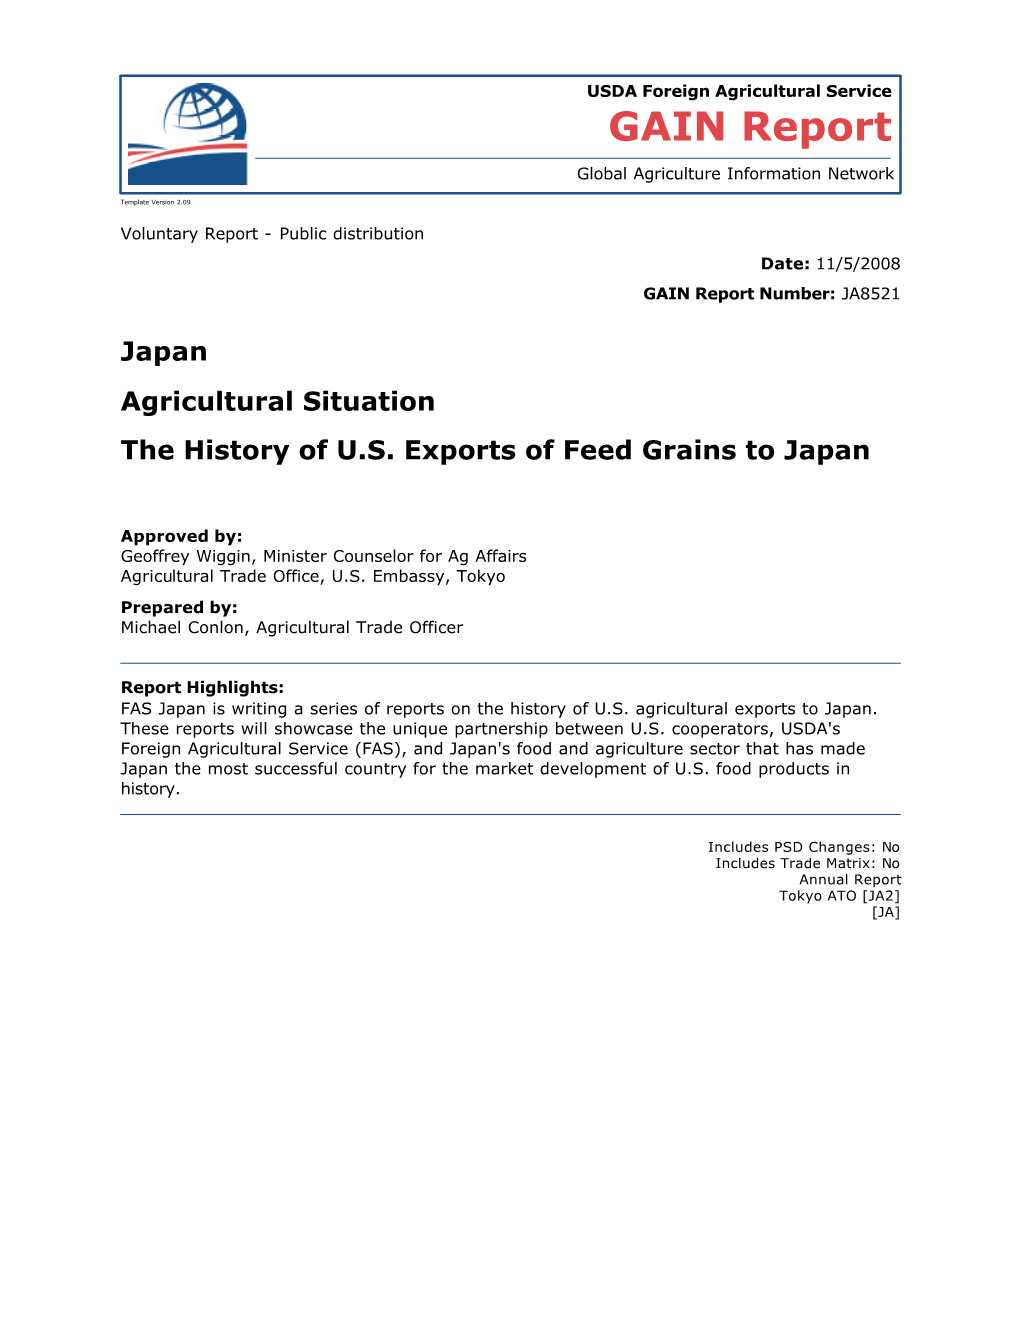 The History of U.S. Exports of Feed Grains to Japan